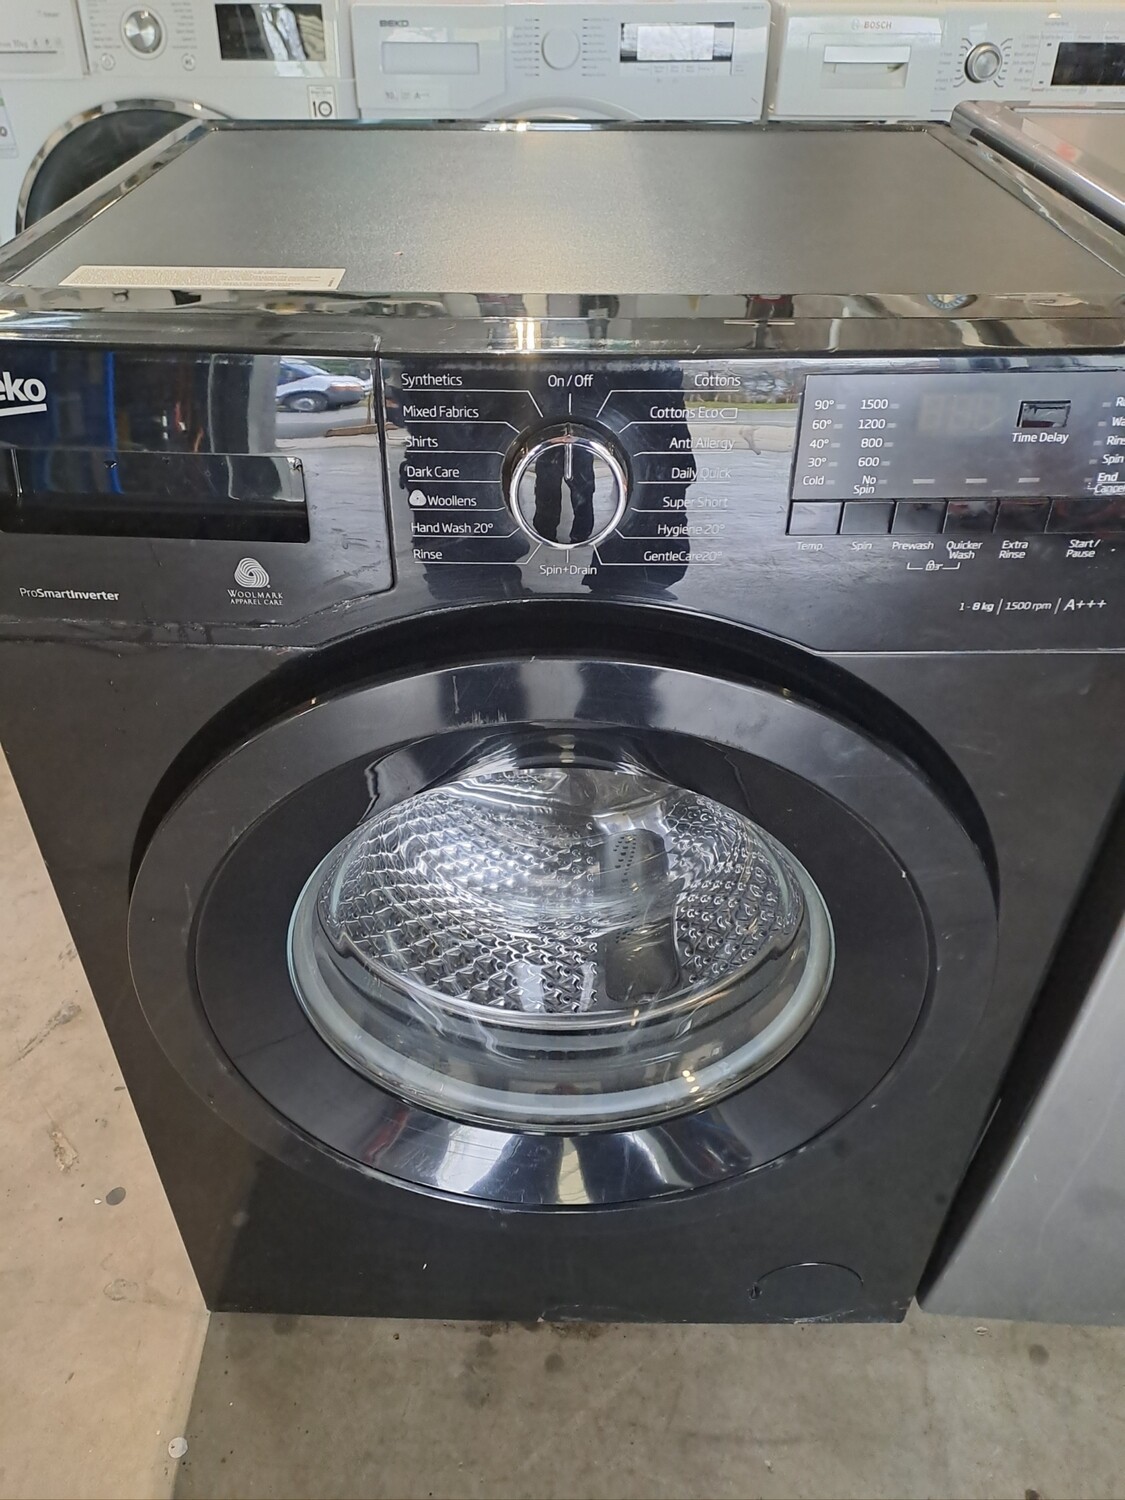 Beko WR85241B 8kg Load 1400 Spin Washing Machine - Black - Refurbished - 6 Month Guarantee. This item is located in our Whitby Road Shop